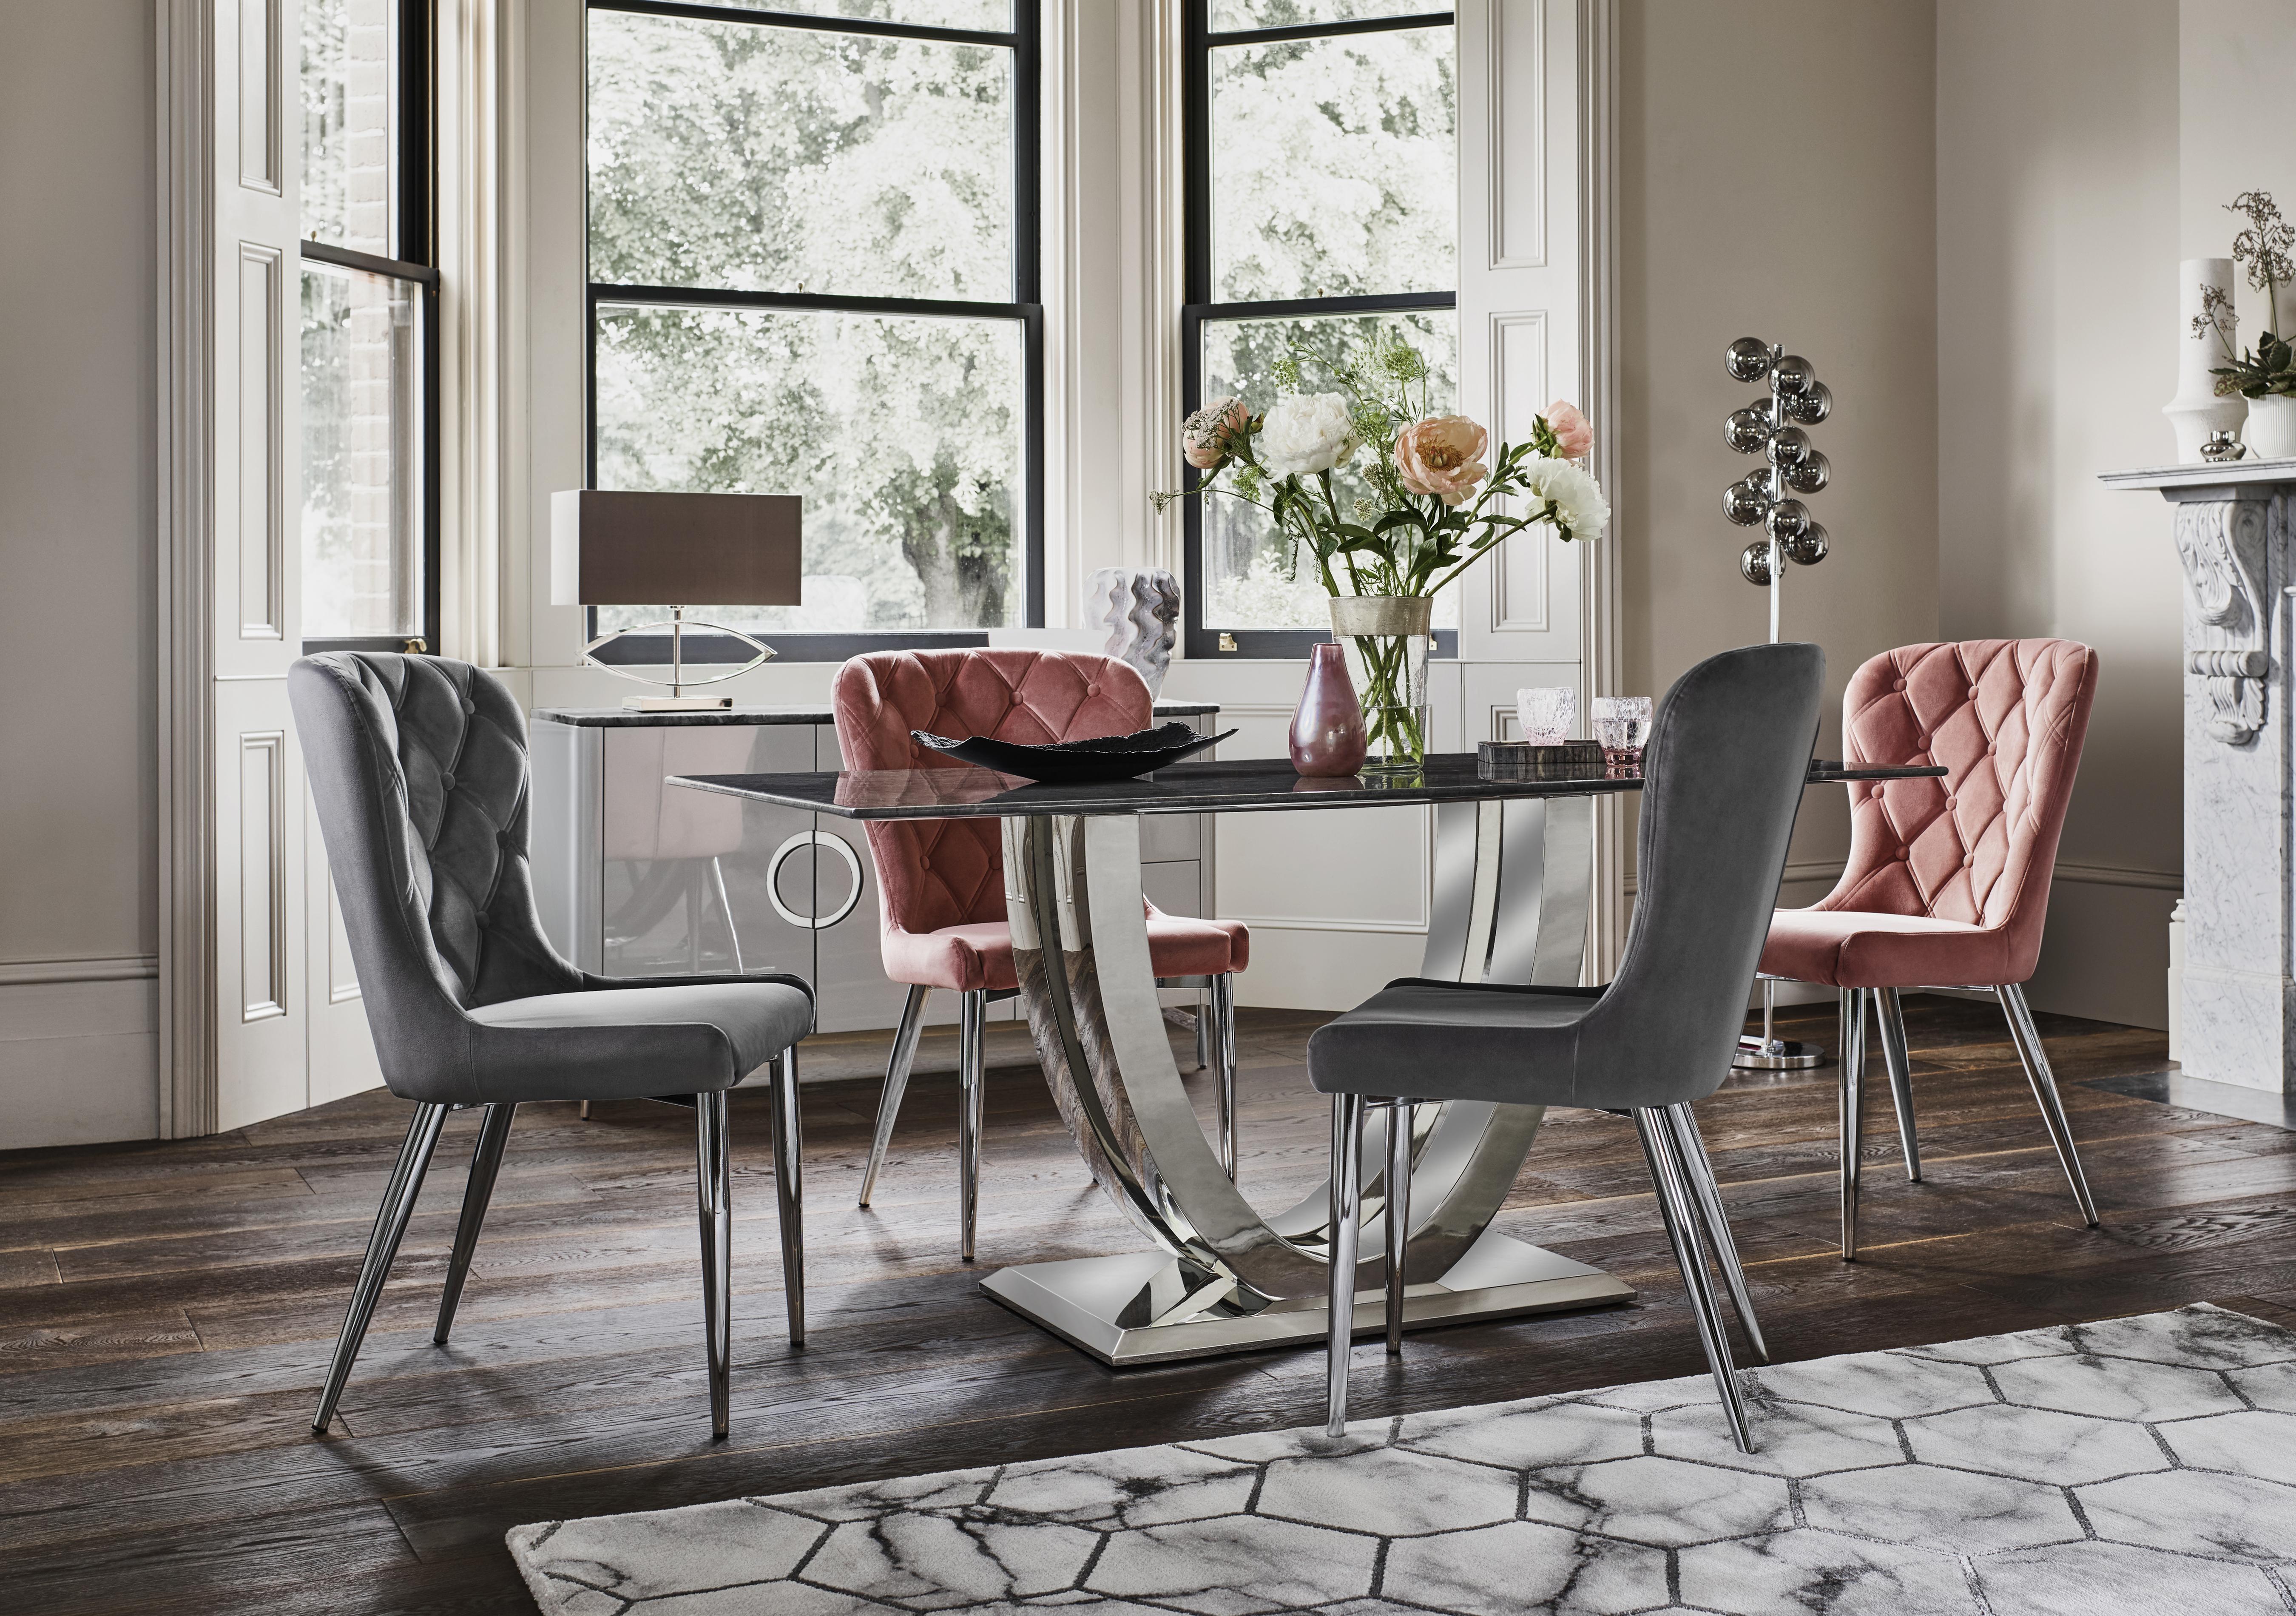 Types of Dining Chairs: A Chair Guide for Your Dining Room